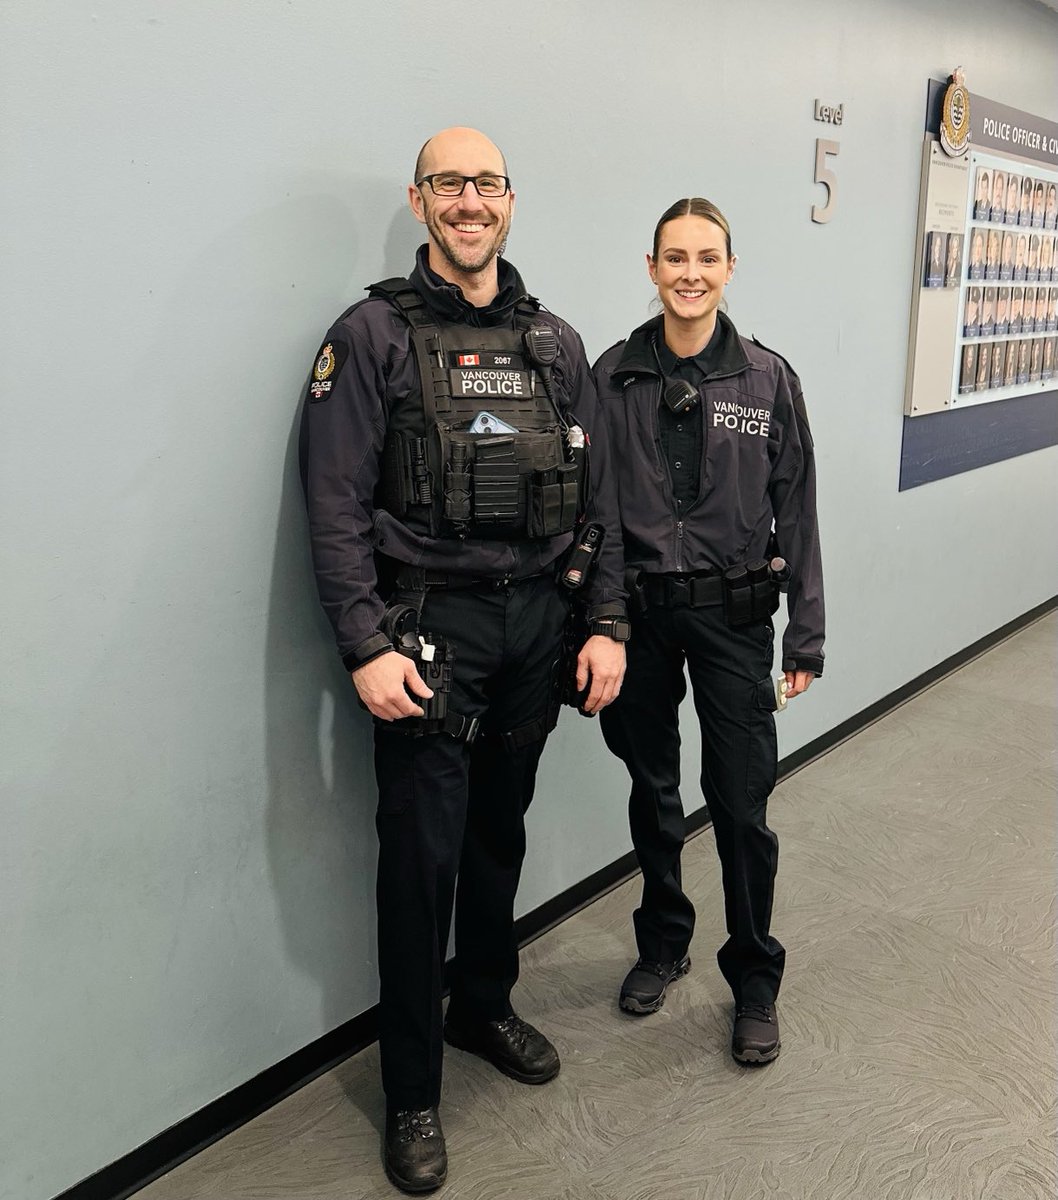 Some more great work by 2 of #VancouversFinest. 1st day back from maternity leave, Cst. Babcock got in a foot chase with her partner Cst. Deziel. They arrested a person threatening others with a knife. #AllInADaysWork #MomLife